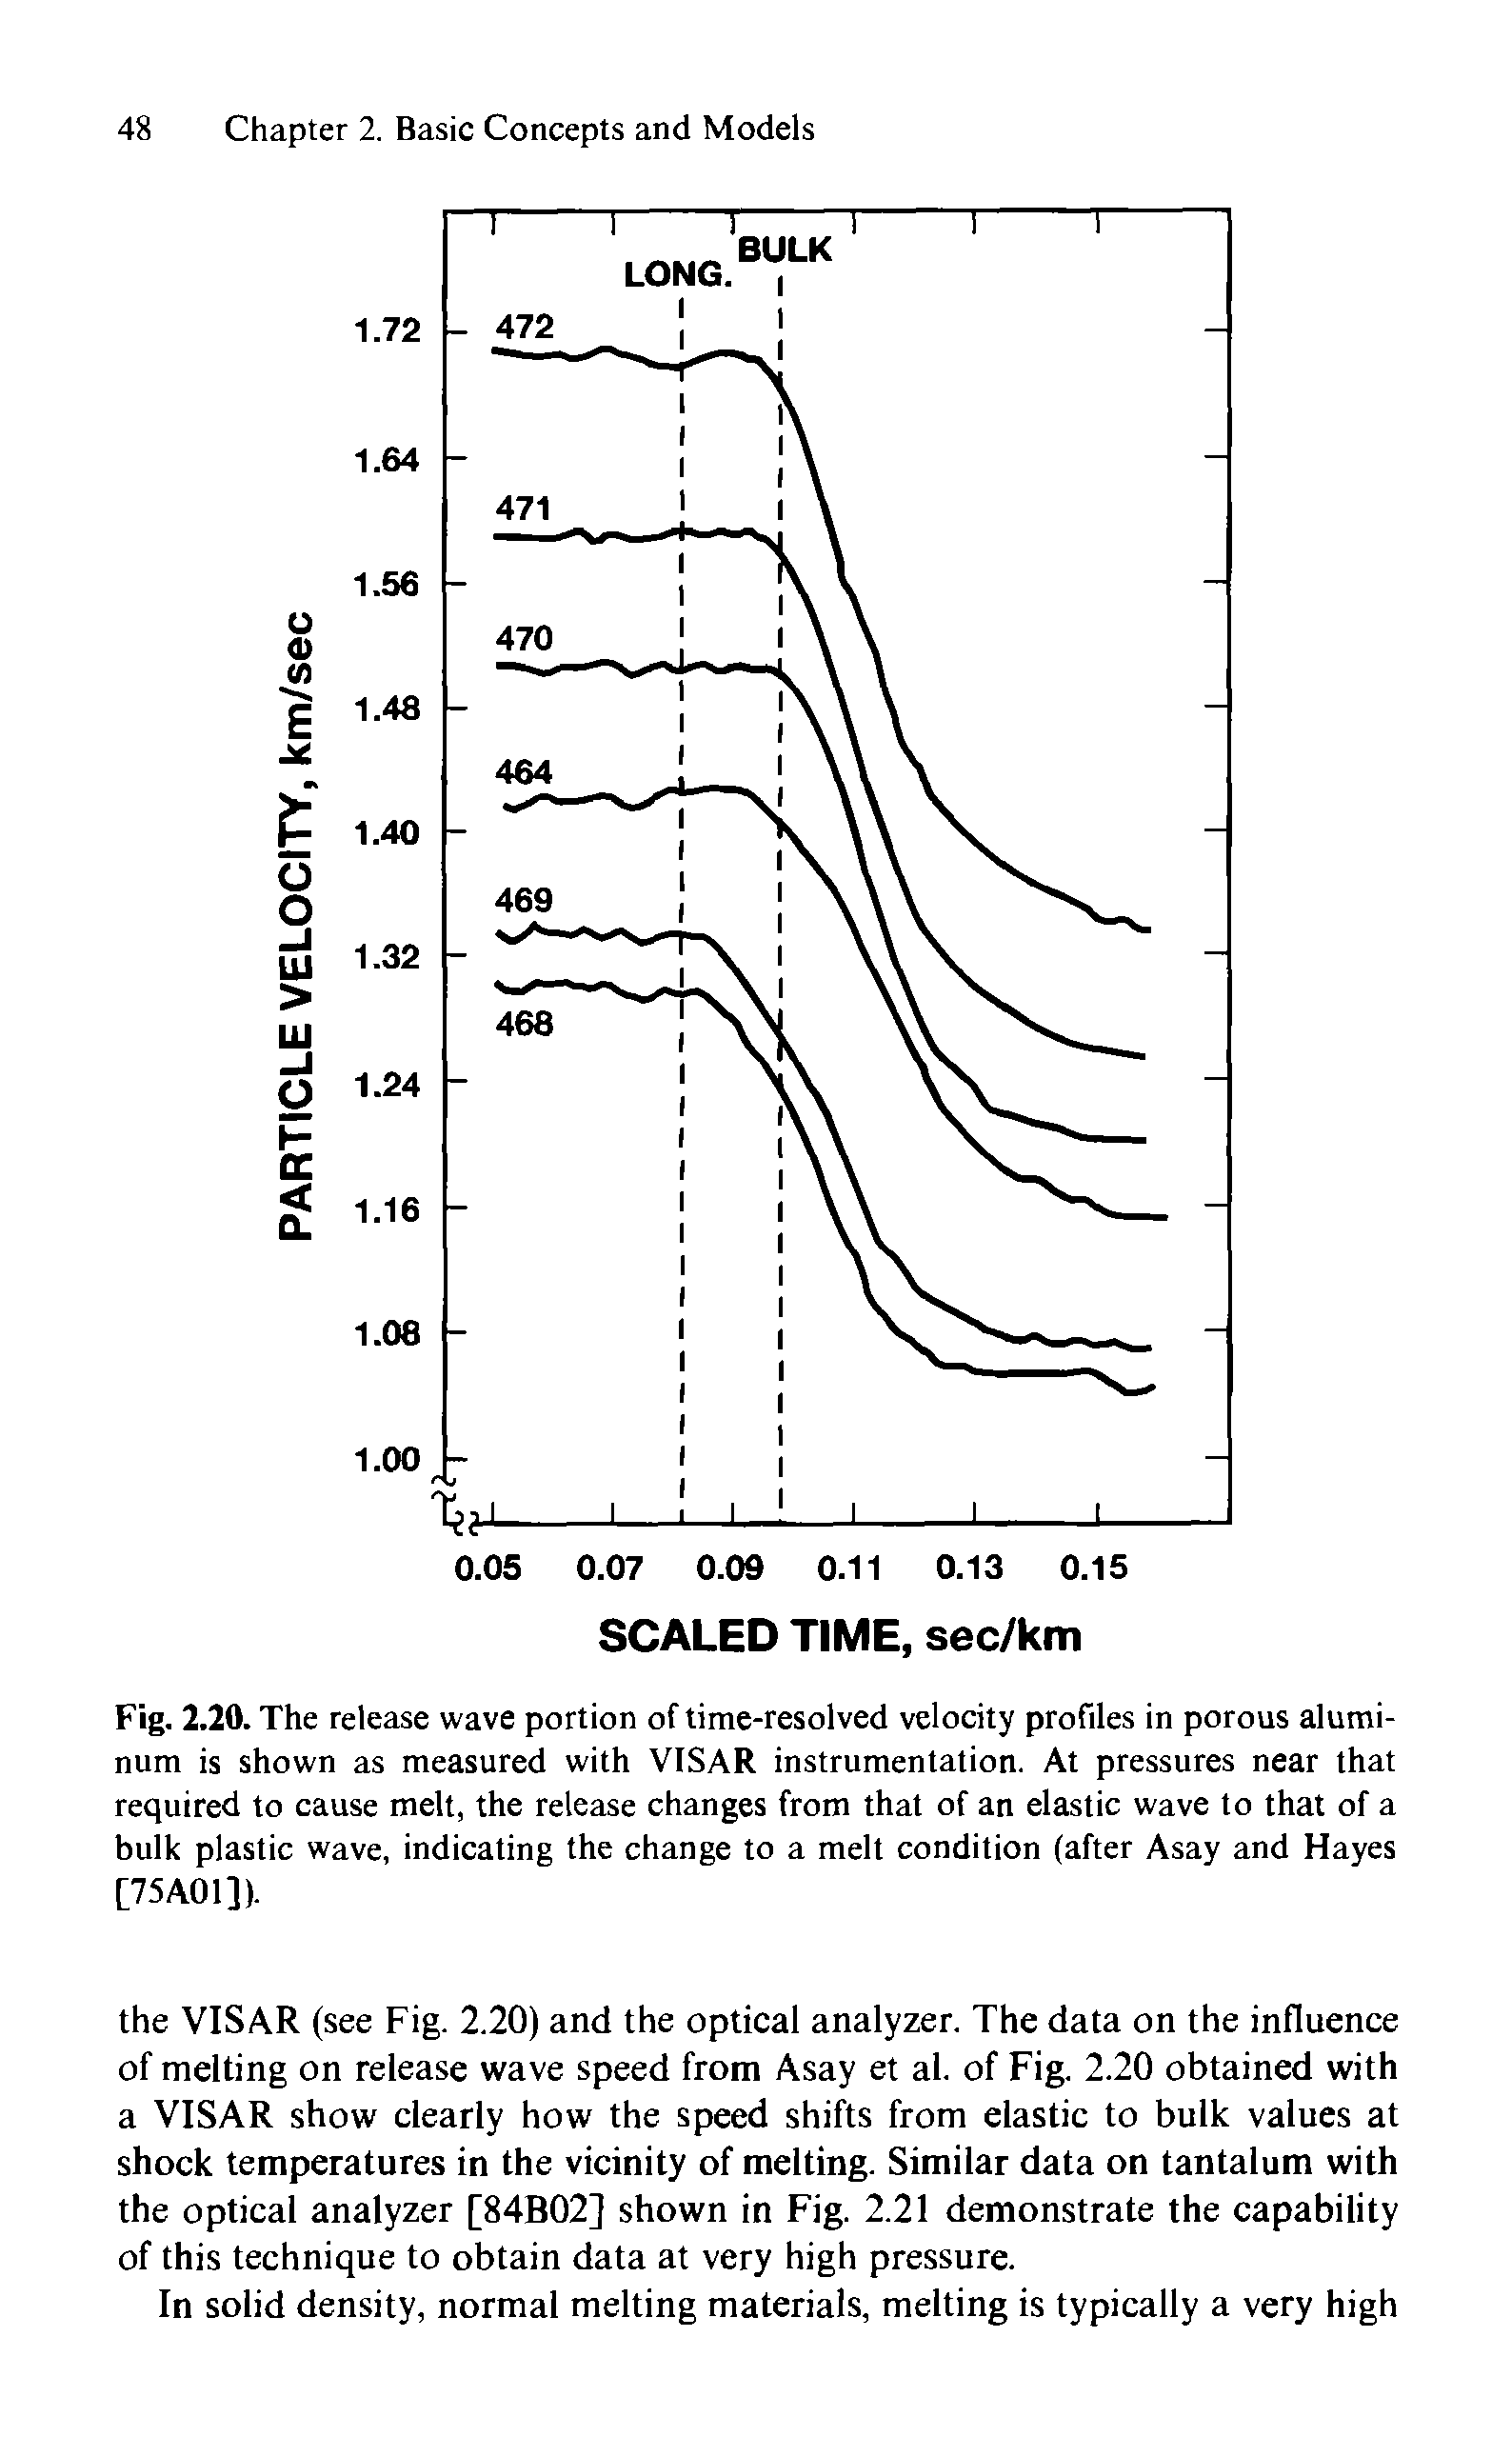 Fig. 2.20. The release wave portion of time-resolved velocity profiles in porous aluminum is shown as measured with VISAR instrumentation. At pressures near that required to cause melt, the release changes from that of an elastic wave to that of a bulk plastic wave, indicating the change to a melt condition (after Asay and Hayes [75A01]).